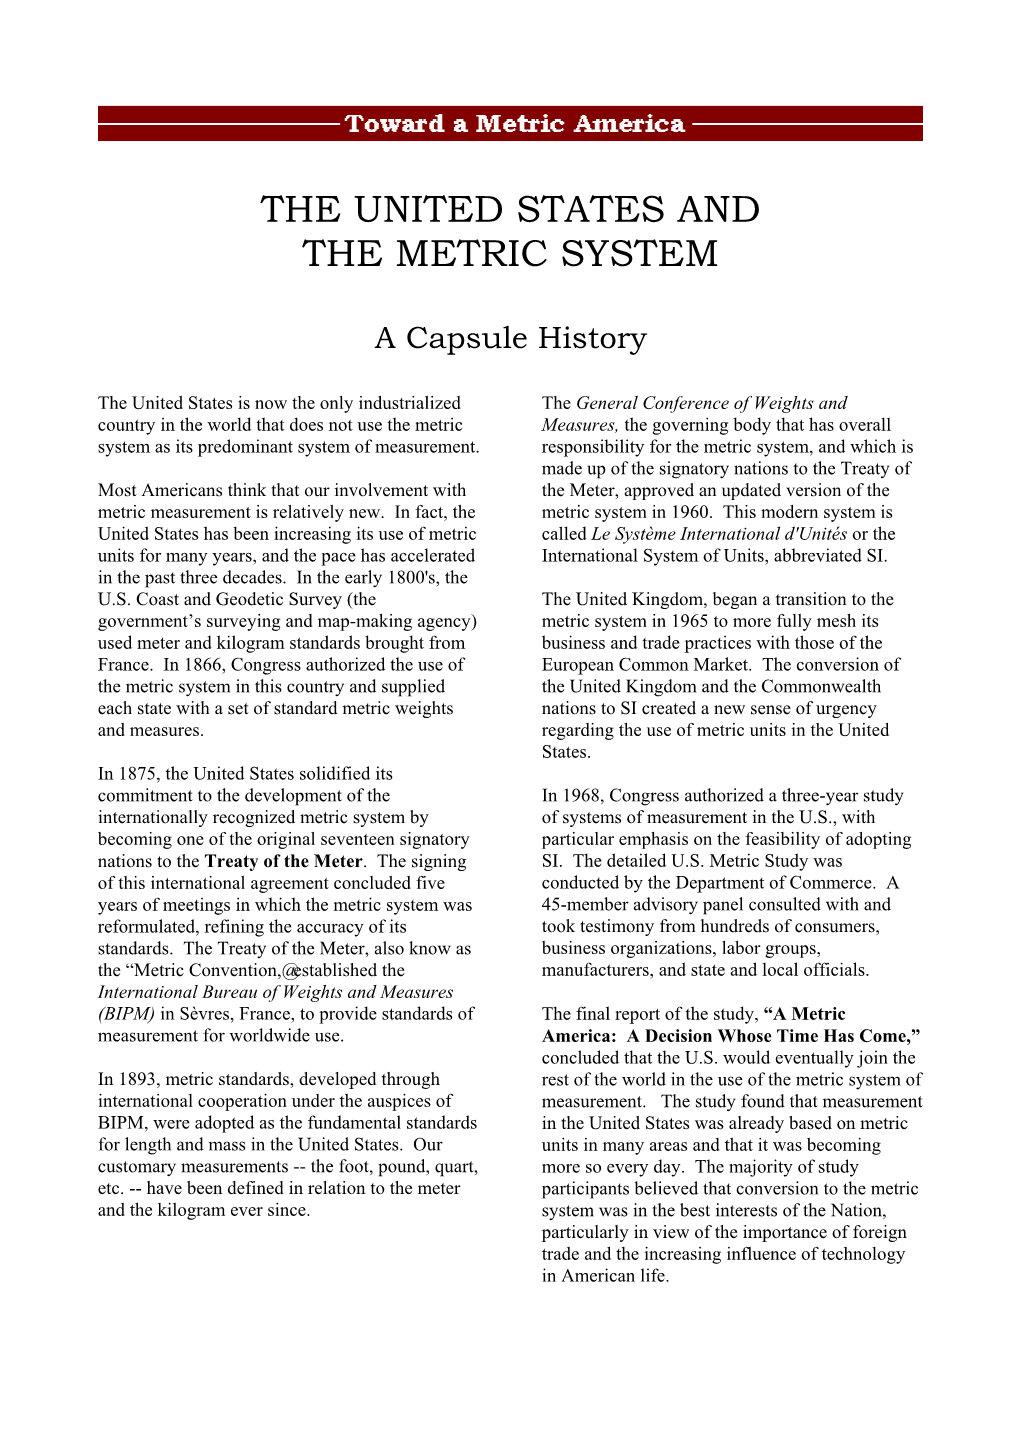 The United States and the Metric System